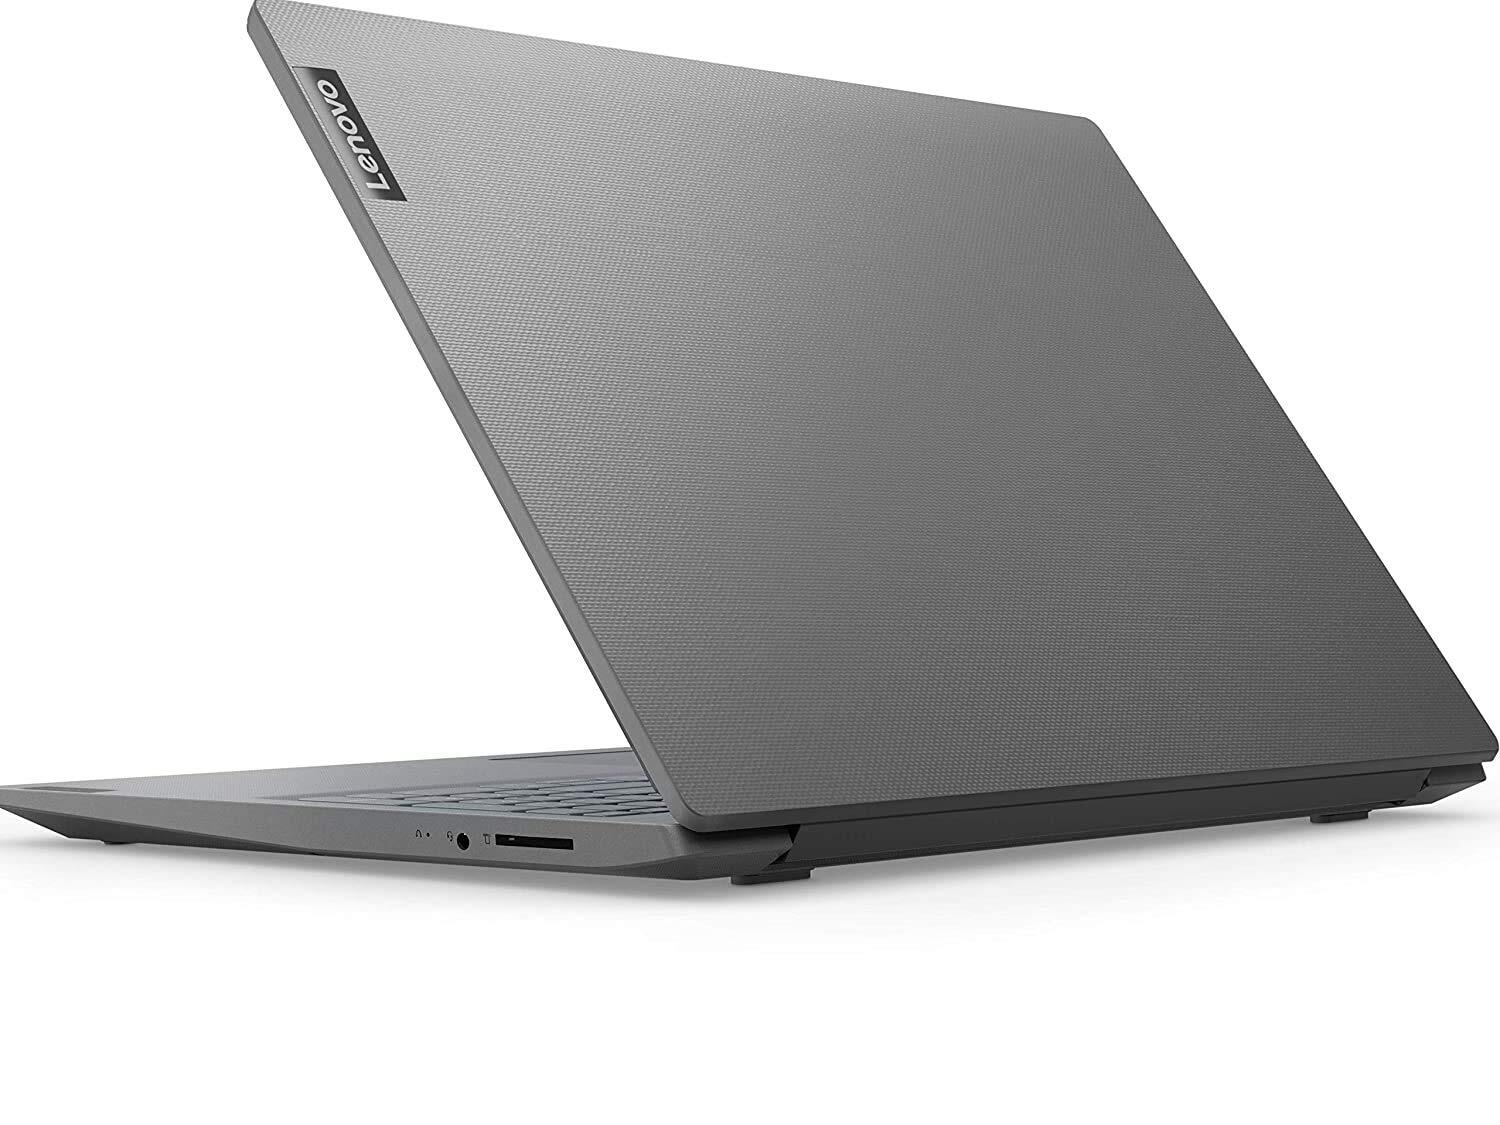 Lenovo V15 Intel Core i3 10th Generation 15.6 inch Screen Laptop (4 GB RAM, 1 TB HDD/Win 10 Home/ Colour Name / Weight), Model Number 82C5A00AIH-M000000000537 www.mysocially.com